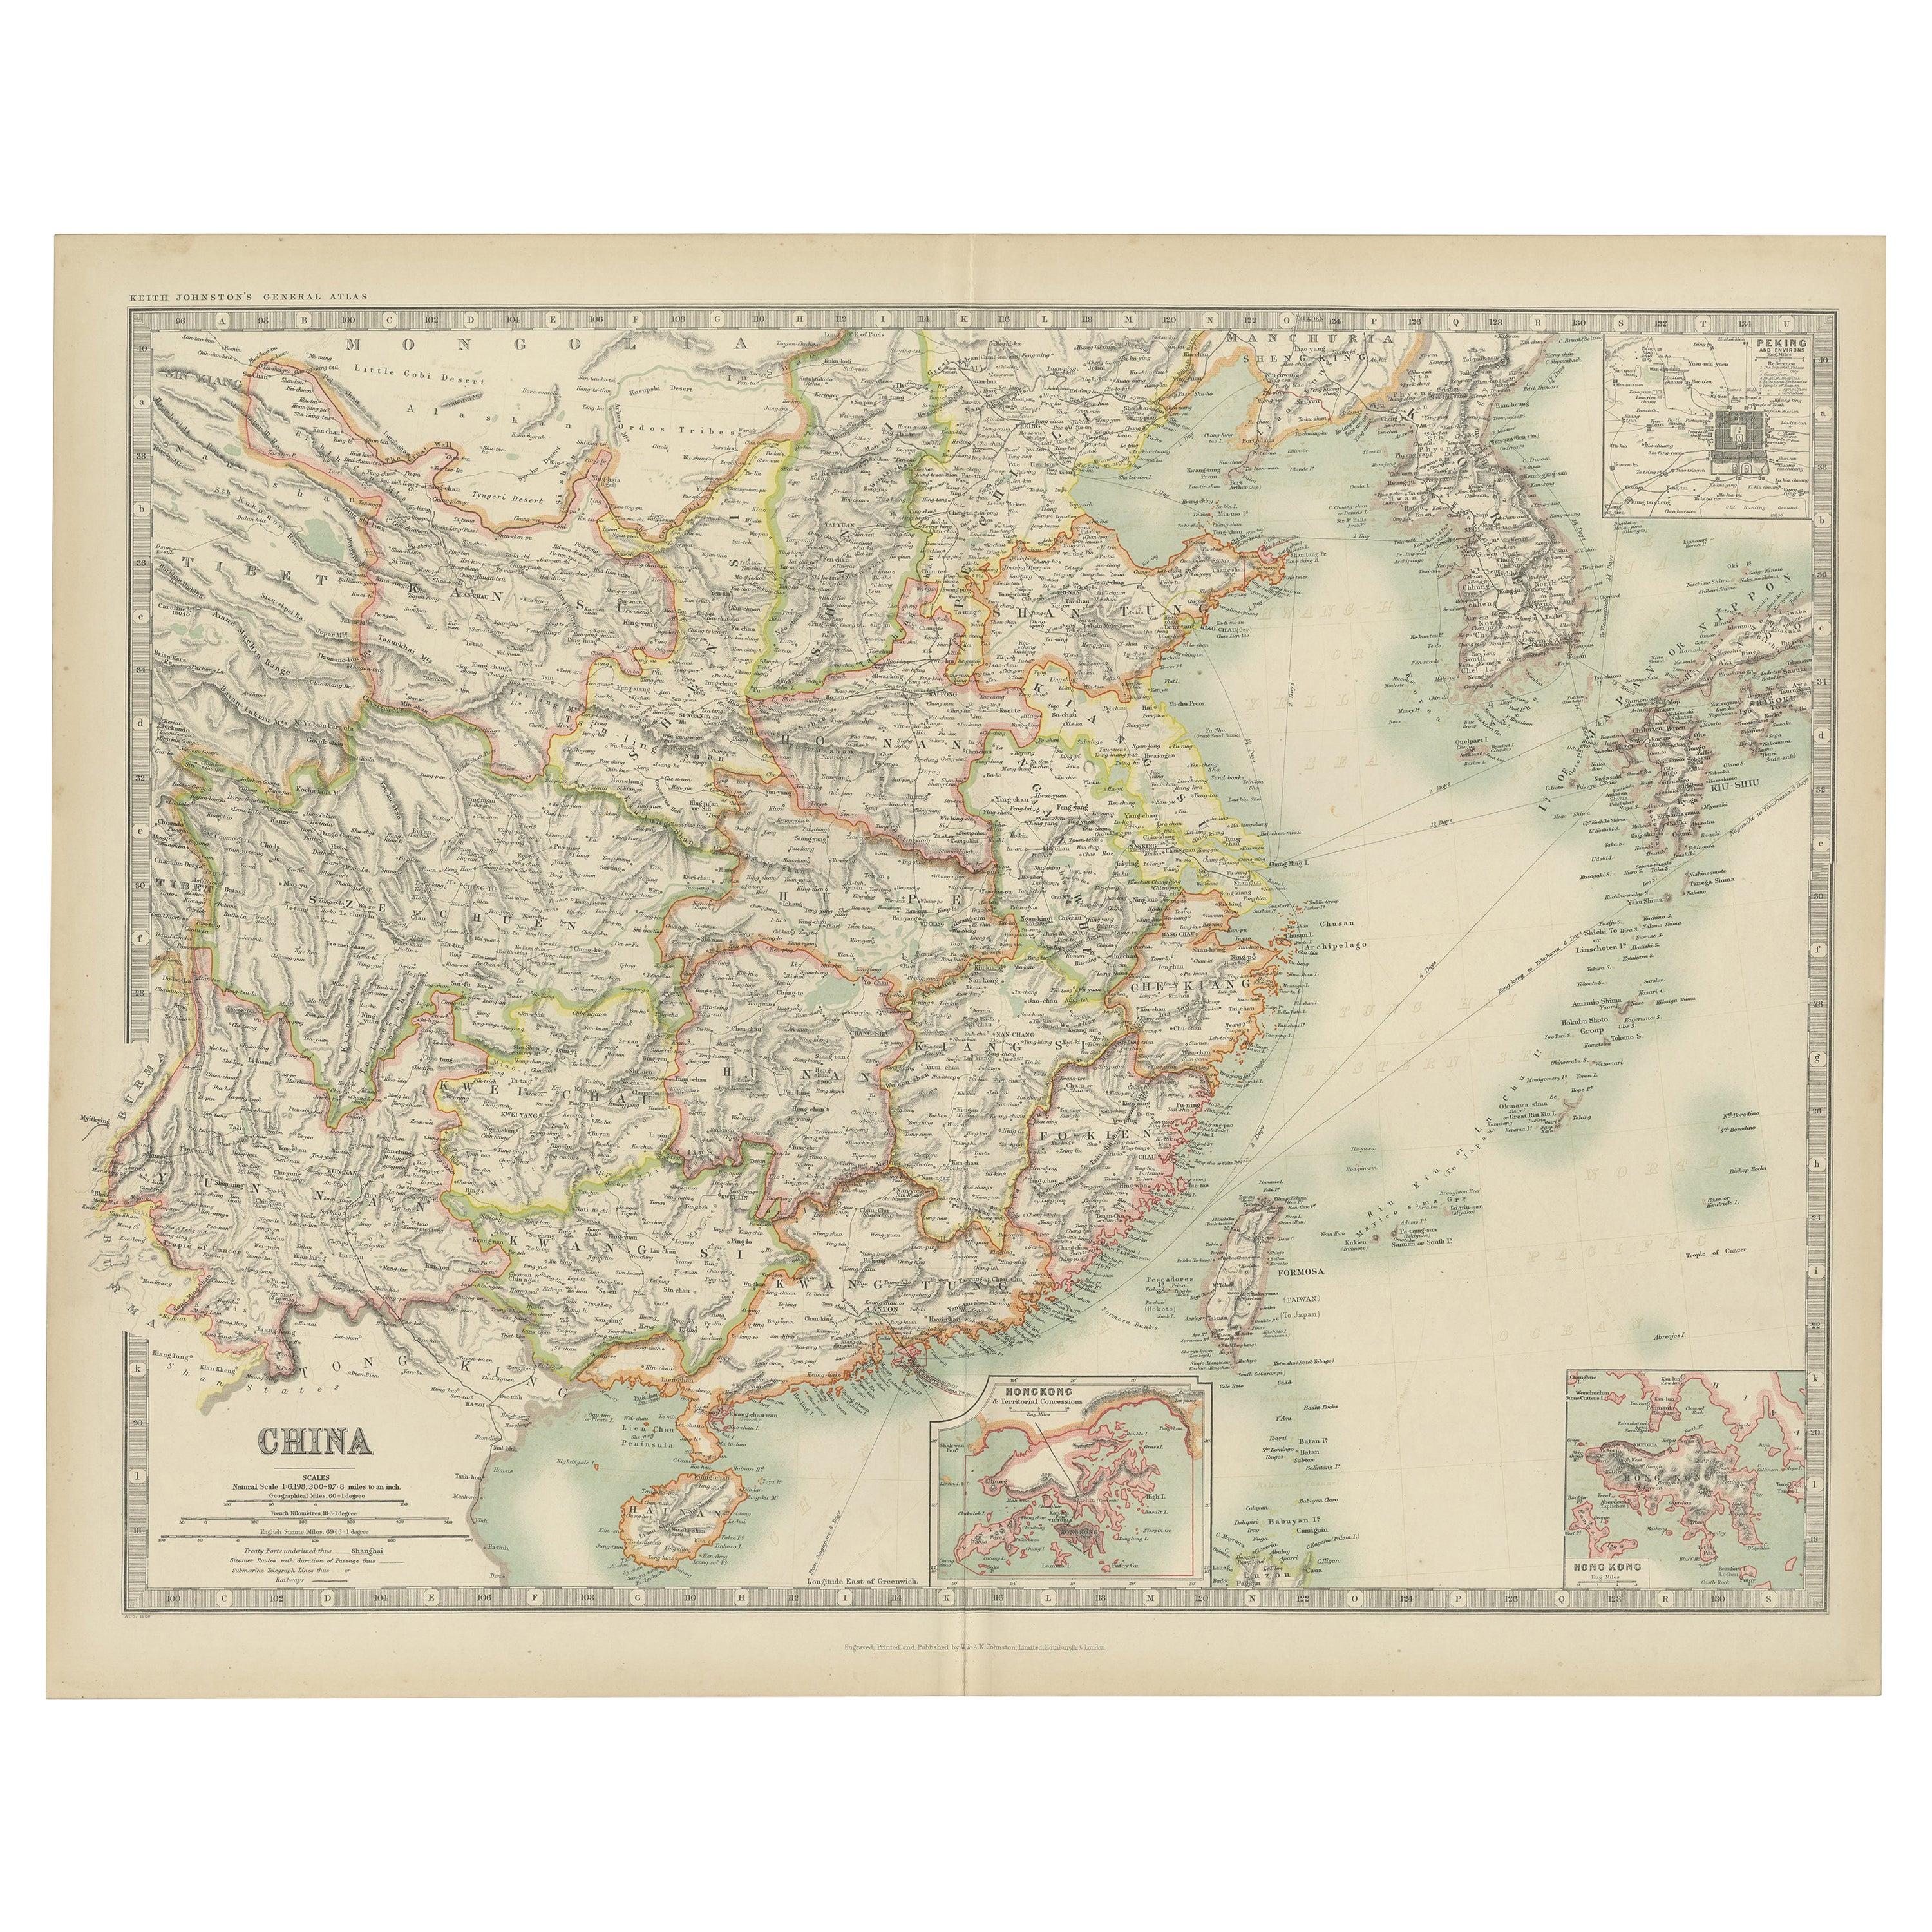 Antique Map of China by Johnston, '1909'